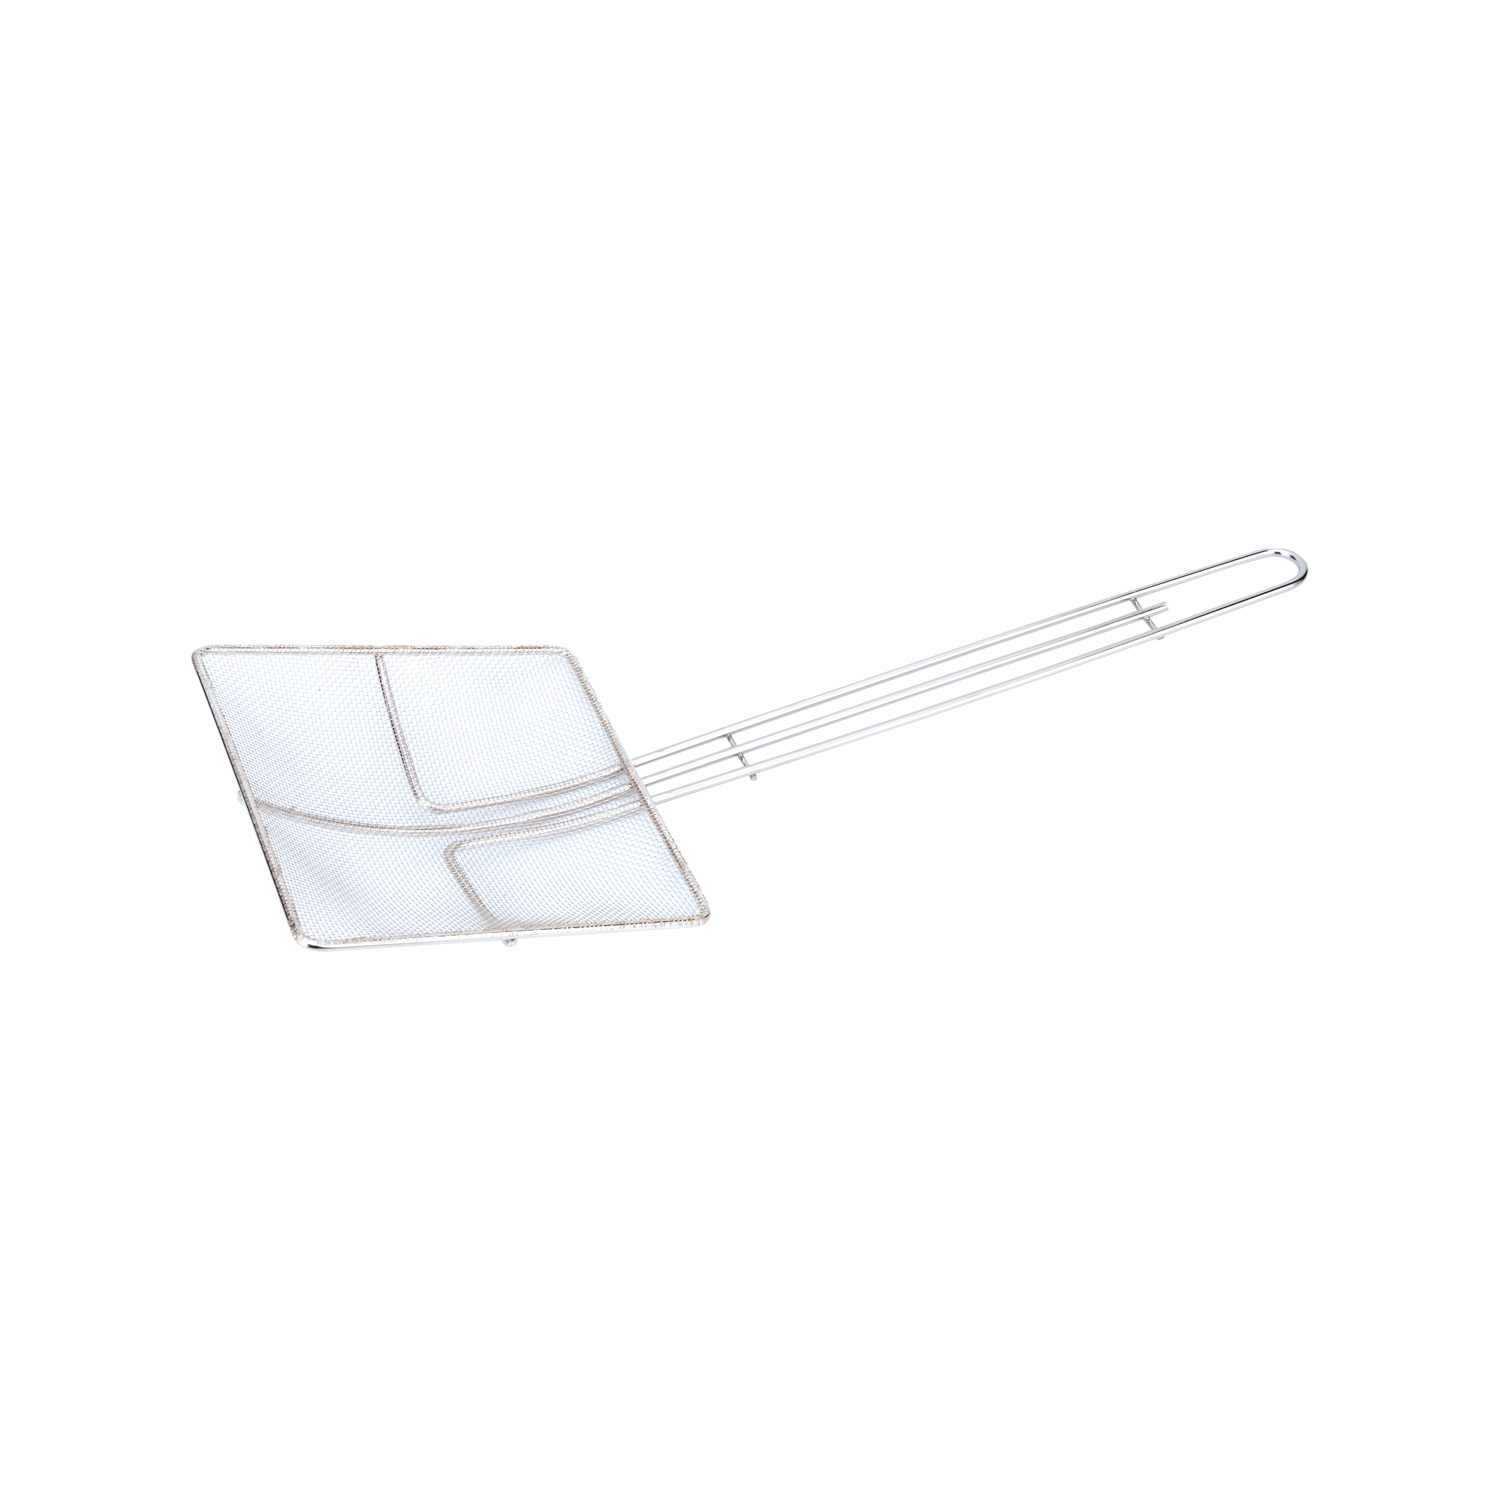 CAC China SKMS-7S Square Nickel-Plated Mesh Skimmer 7"